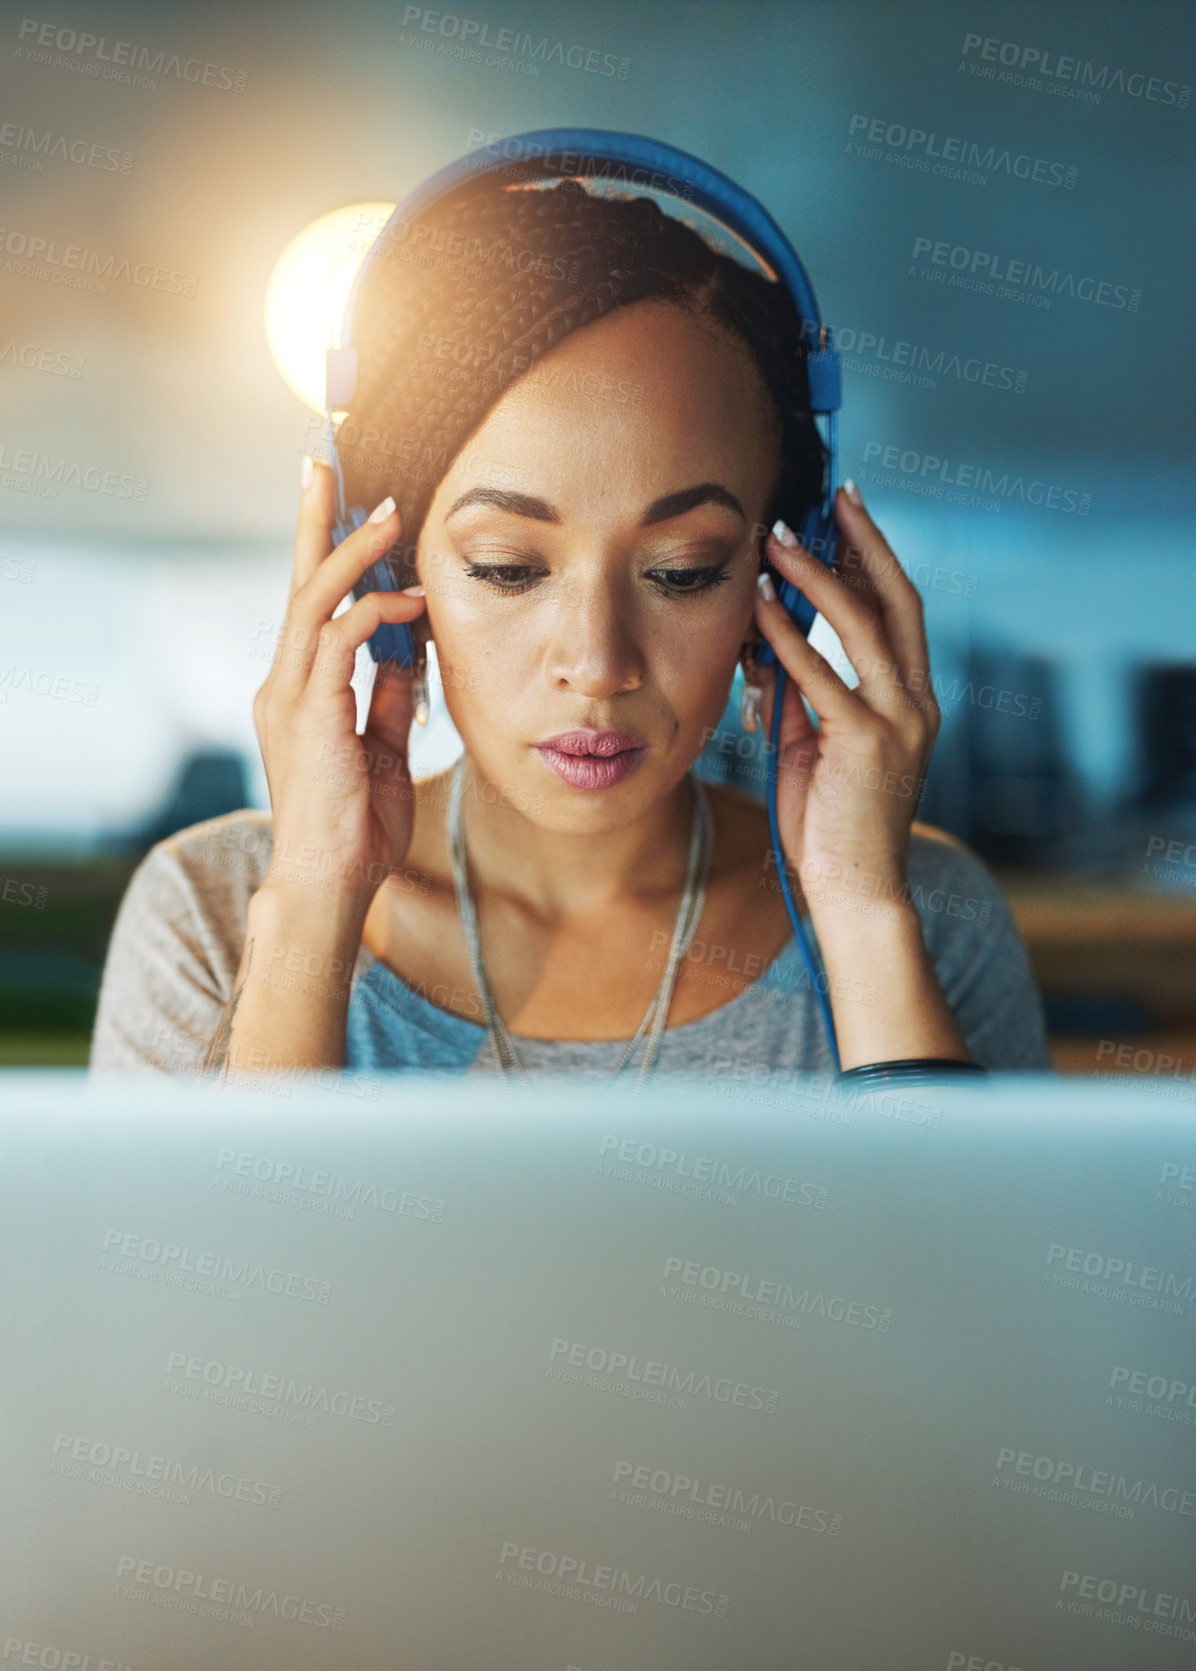 Buy stock photo Cropped shot of a young woman listening to music while working late in her office